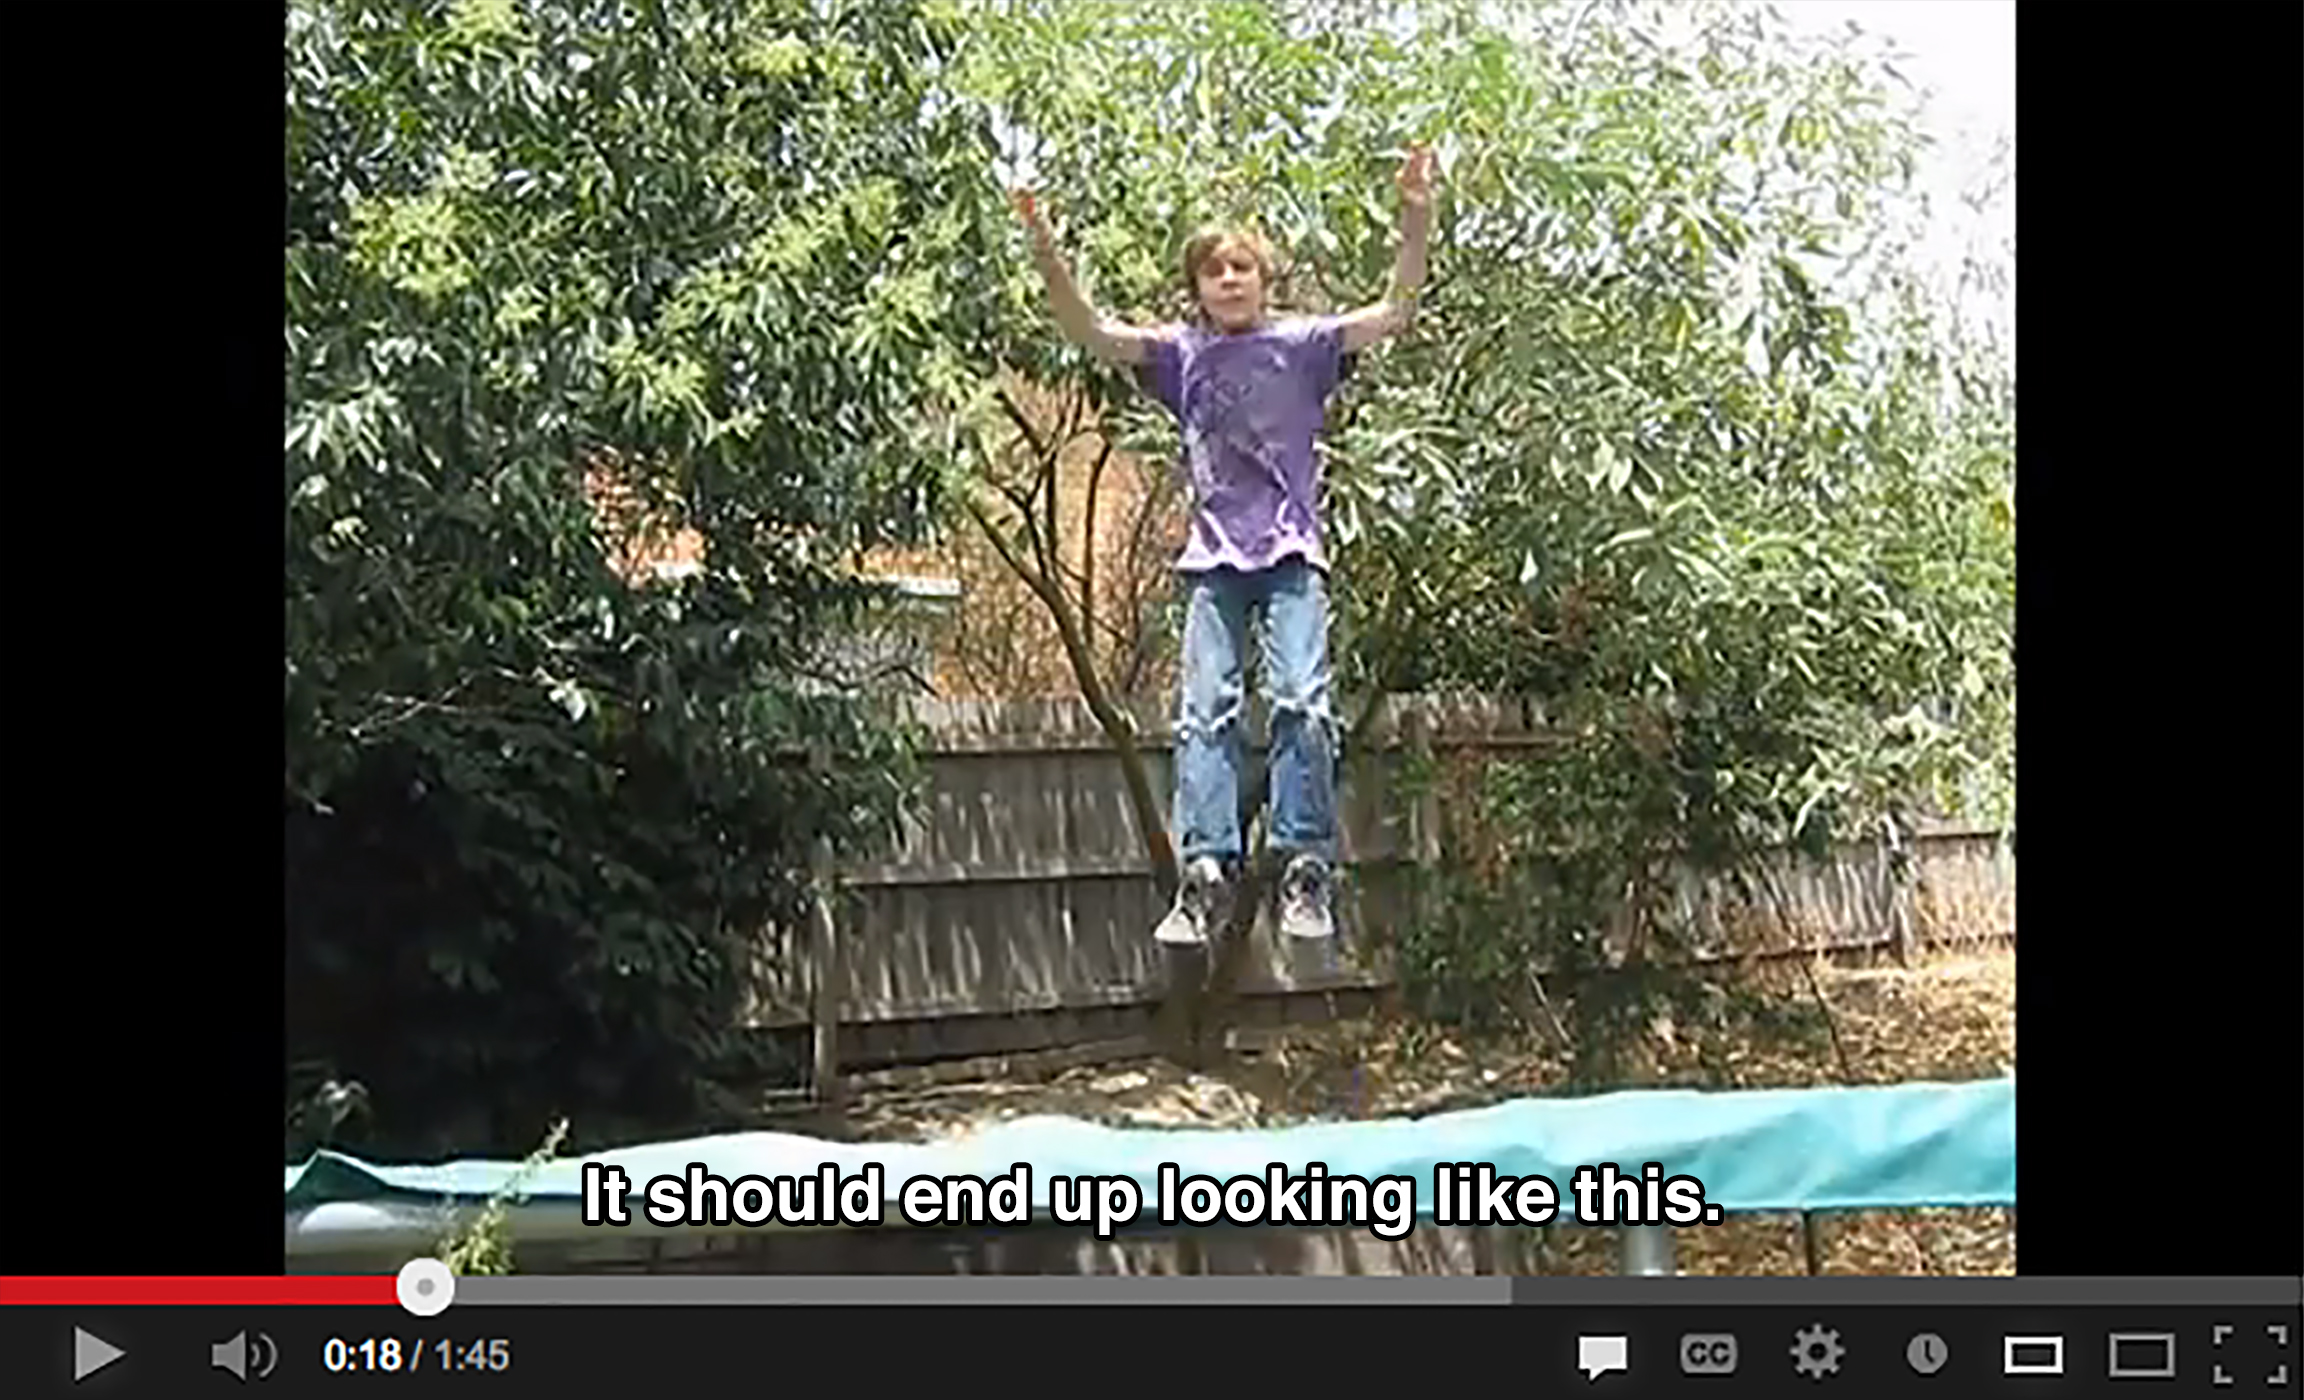 A young boy midair on a backyard trampoline has his hands in the air and says: It should end up looking like this.